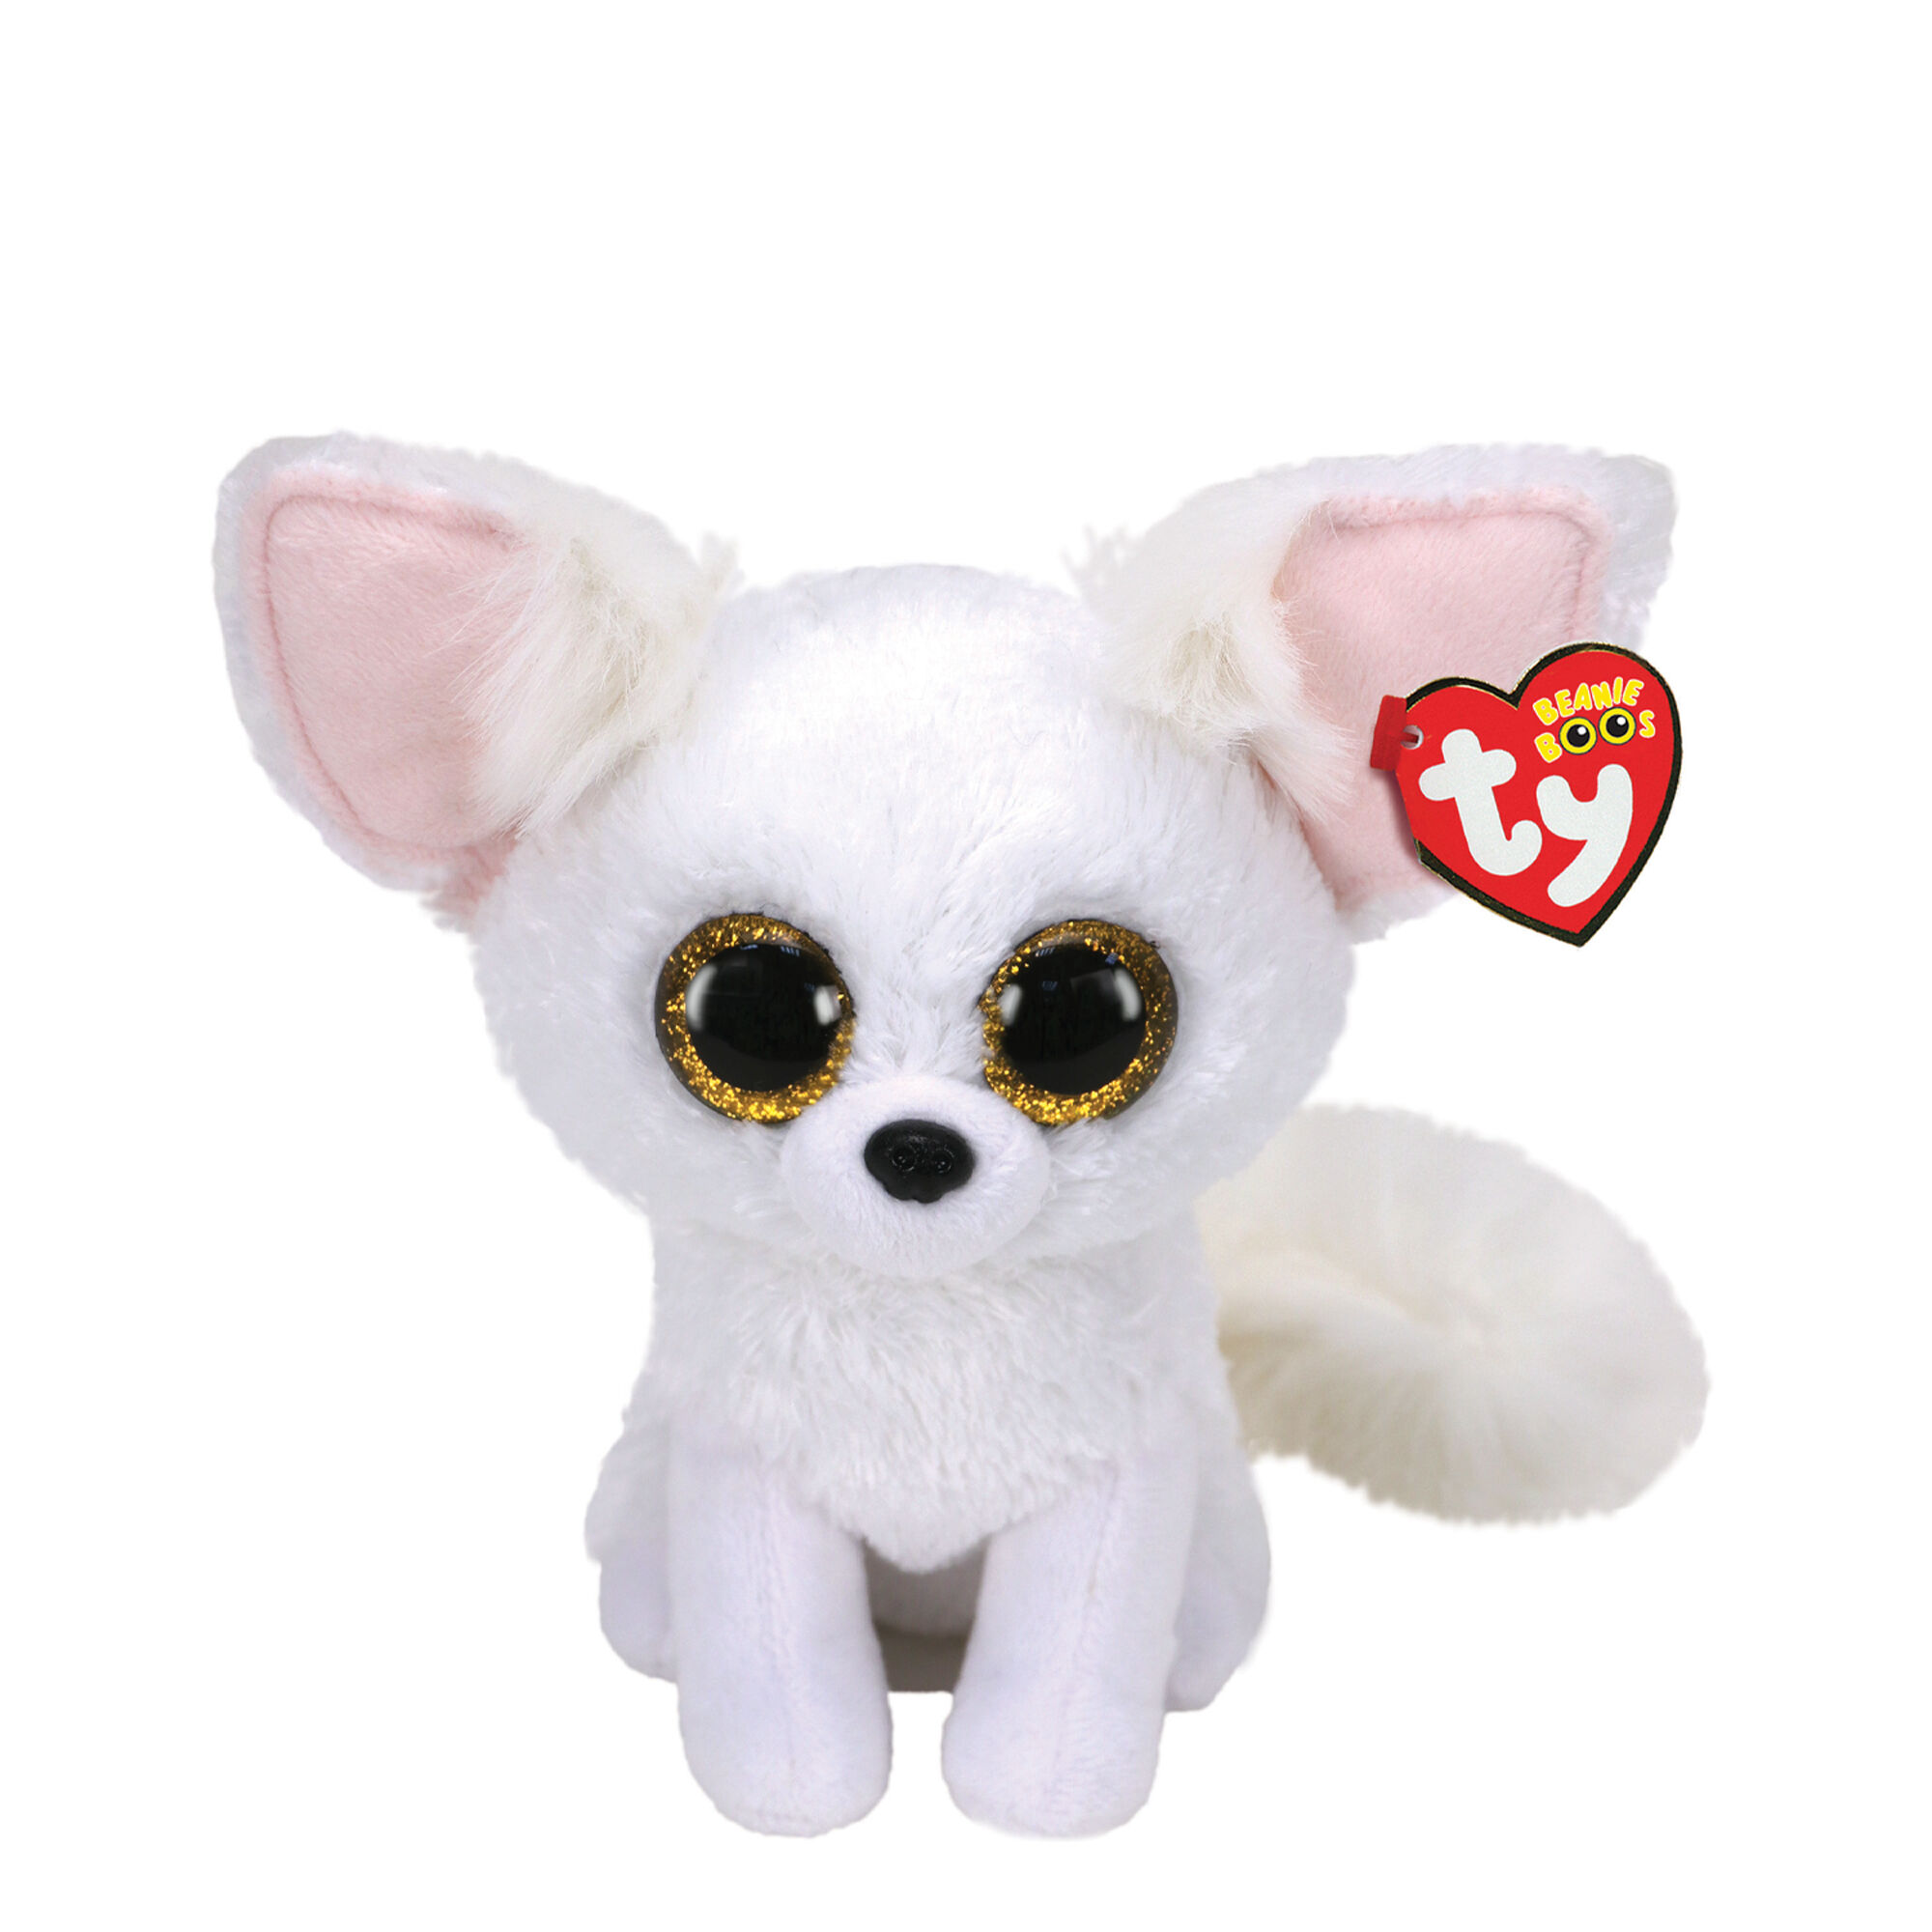 FIFI & SIMONE 6" Claire's Exclusives MWMT Ty Beanie Boo PIPPA 